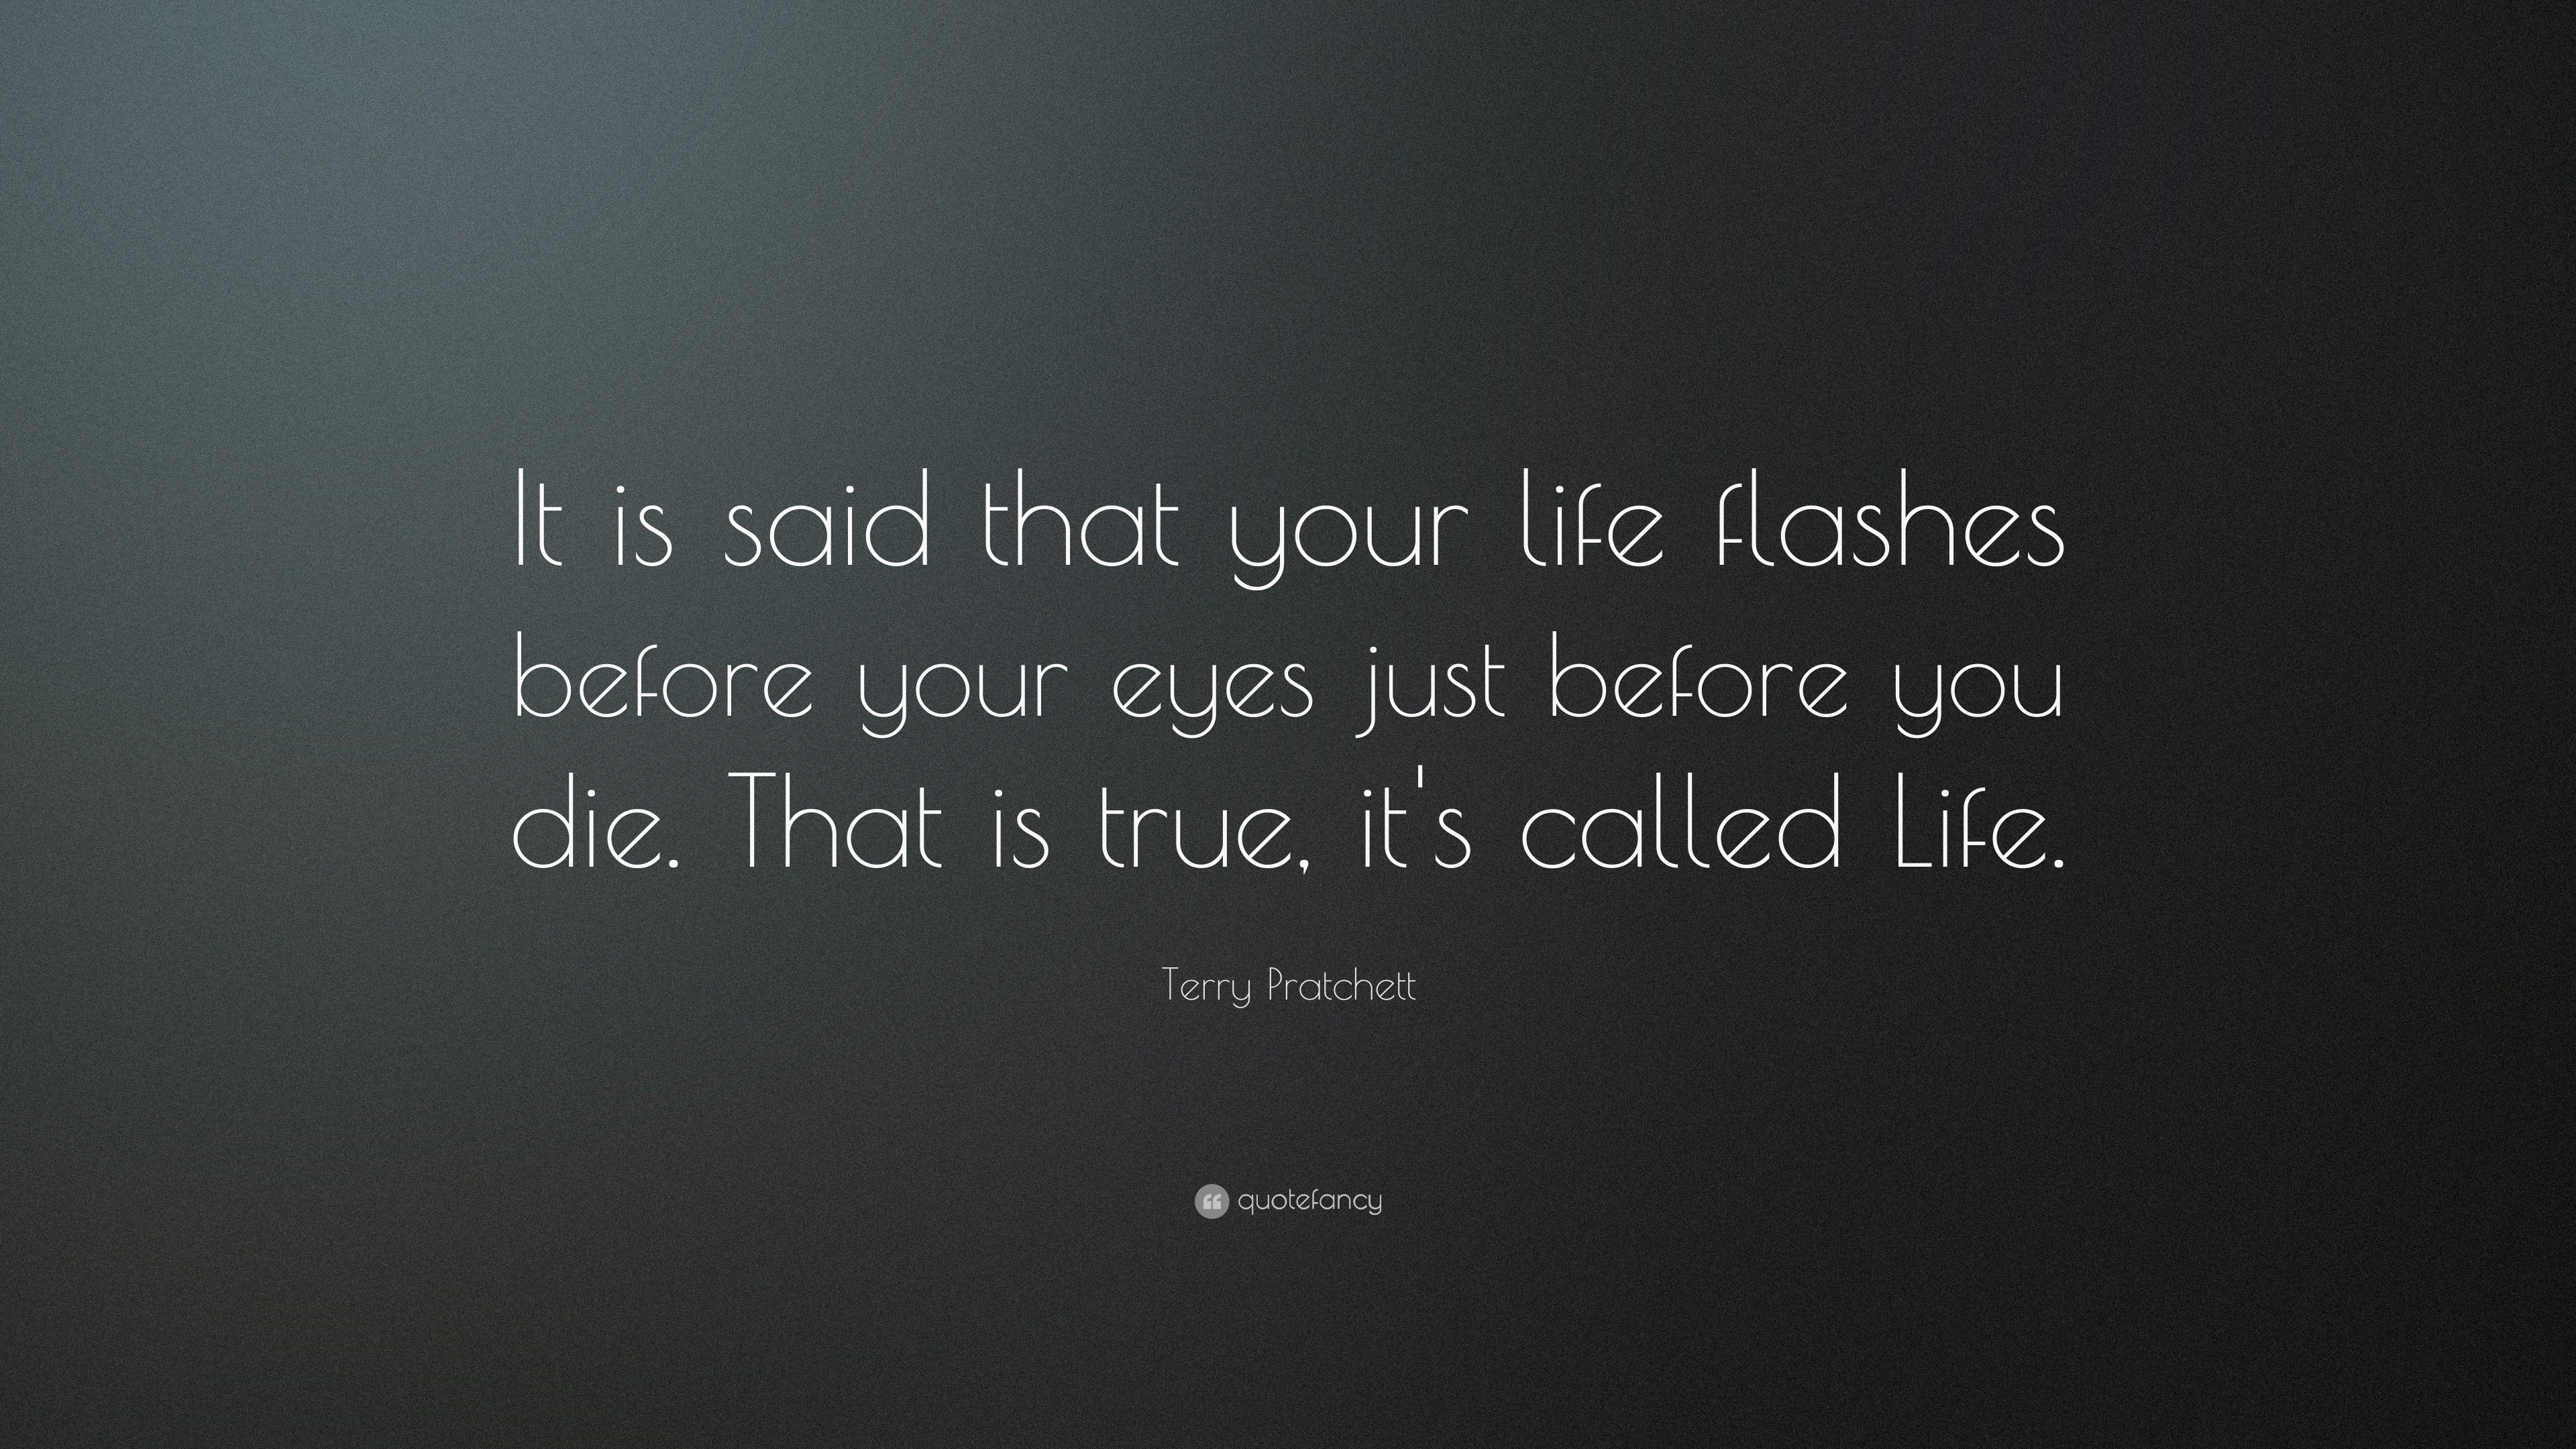 your life flashes before your eyes before you die